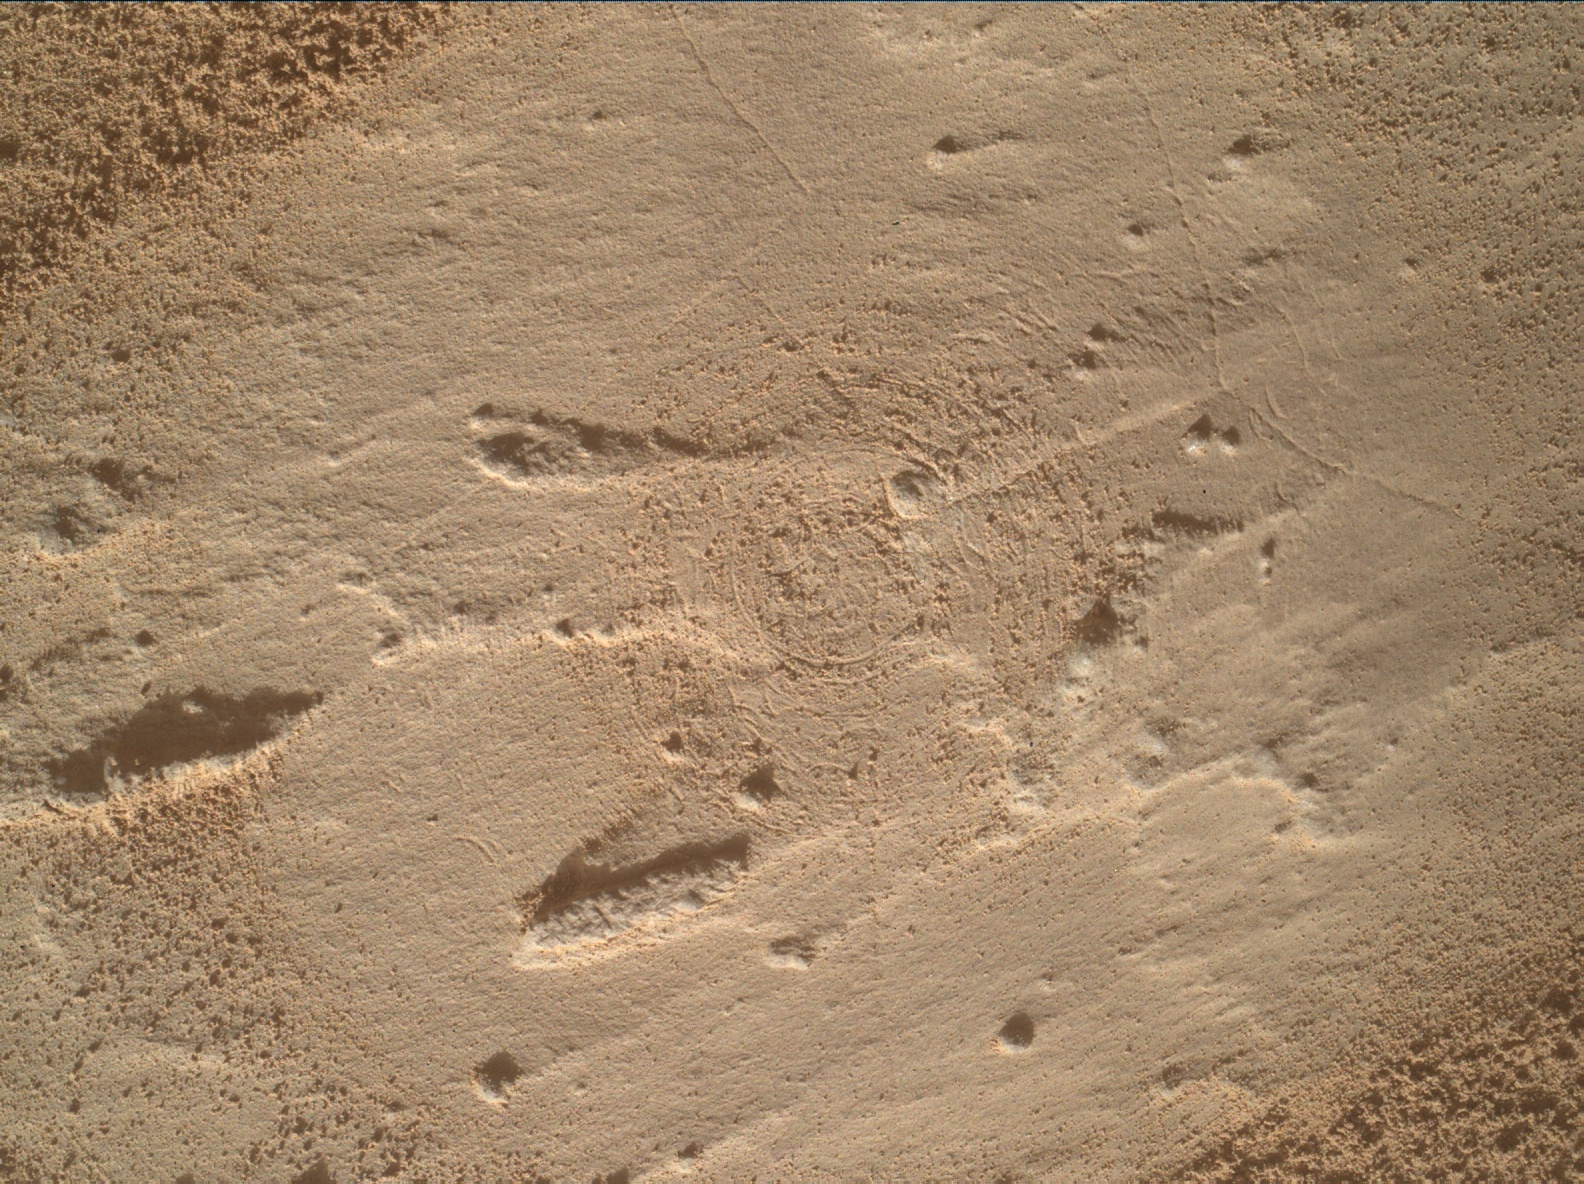 Nasa's Mars rover Curiosity acquired this image using its Mars Hand Lens Imager (MAHLI) on Sol 3964